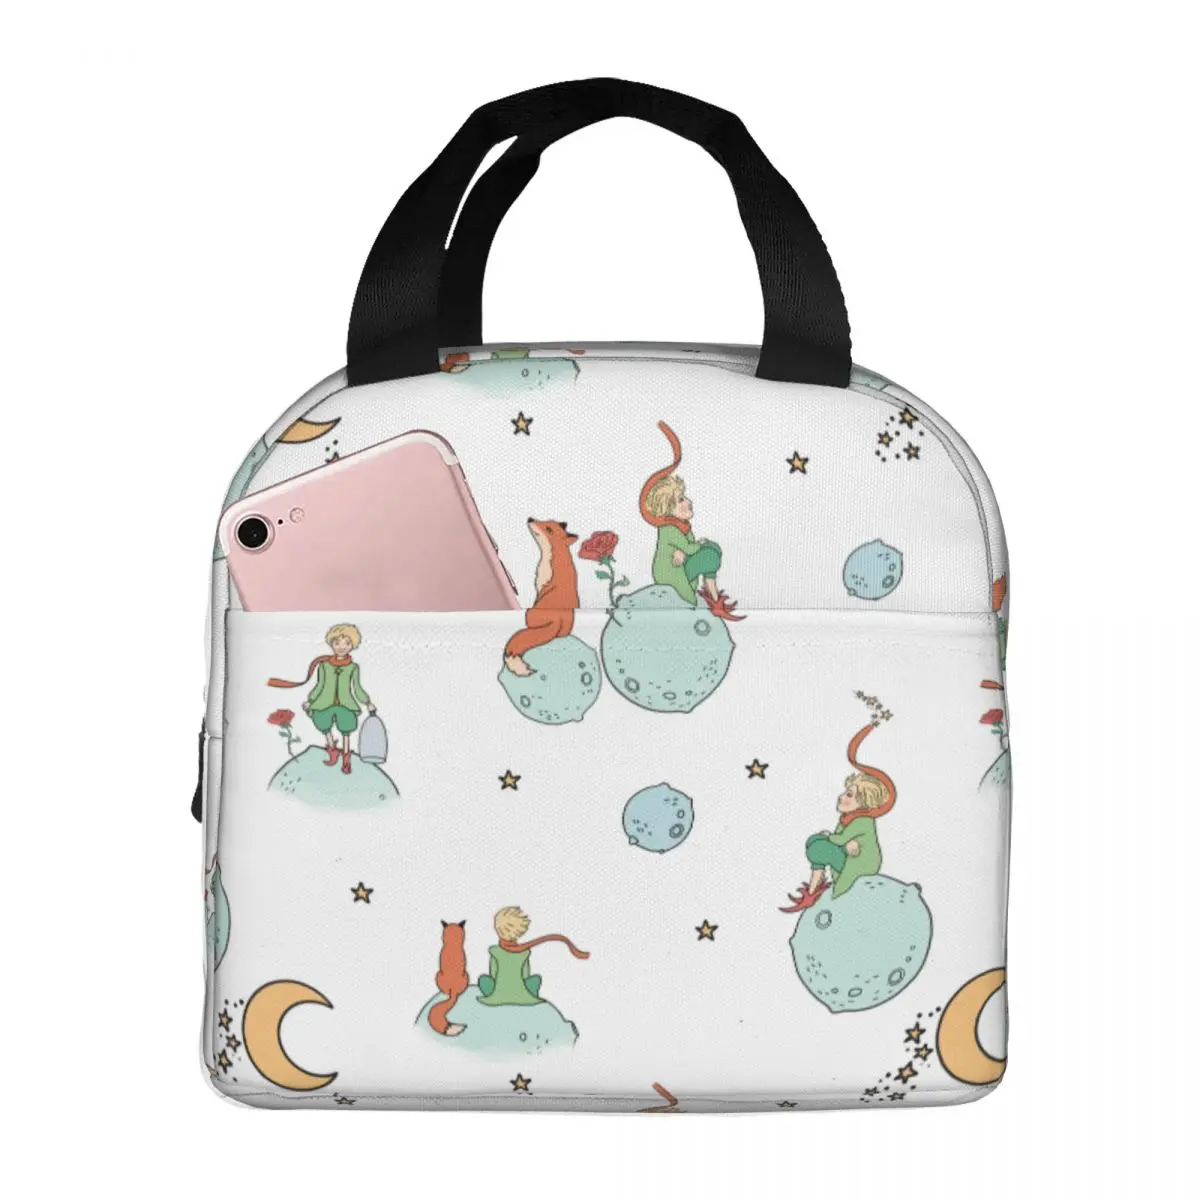 Lunch Bags for Women Kids The Little Prince Fox And Stars Cute Insulated Cooler Bag Portable Picnic Oxford Tote Food Bag